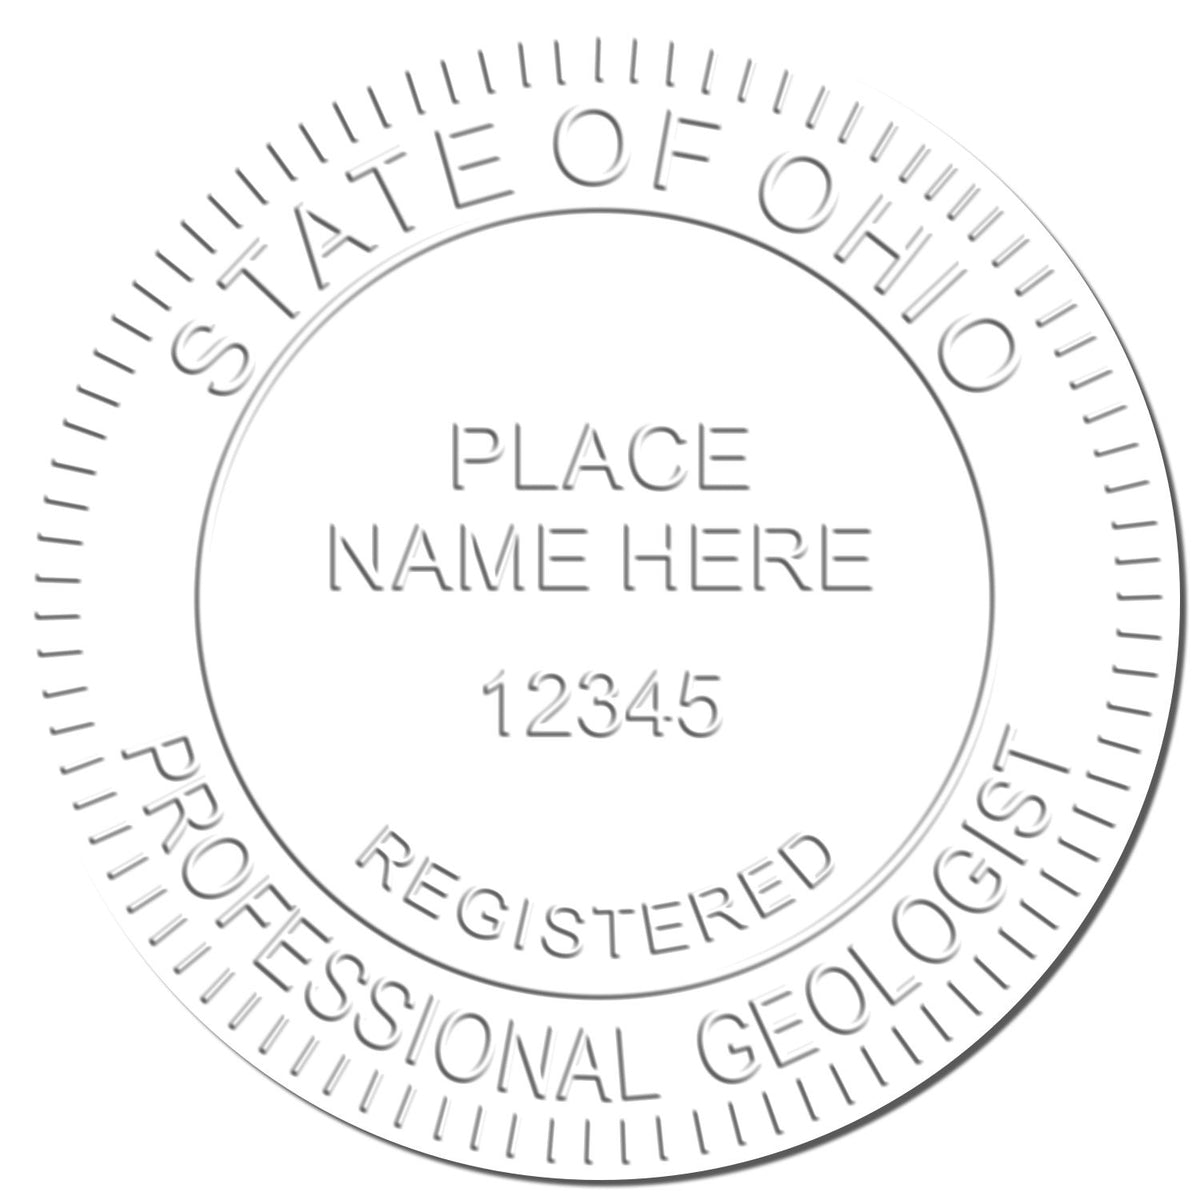 A photograph of the Hybrid Ohio Geologist Seal stamp impression reveals a vivid, professional image of the on paper.